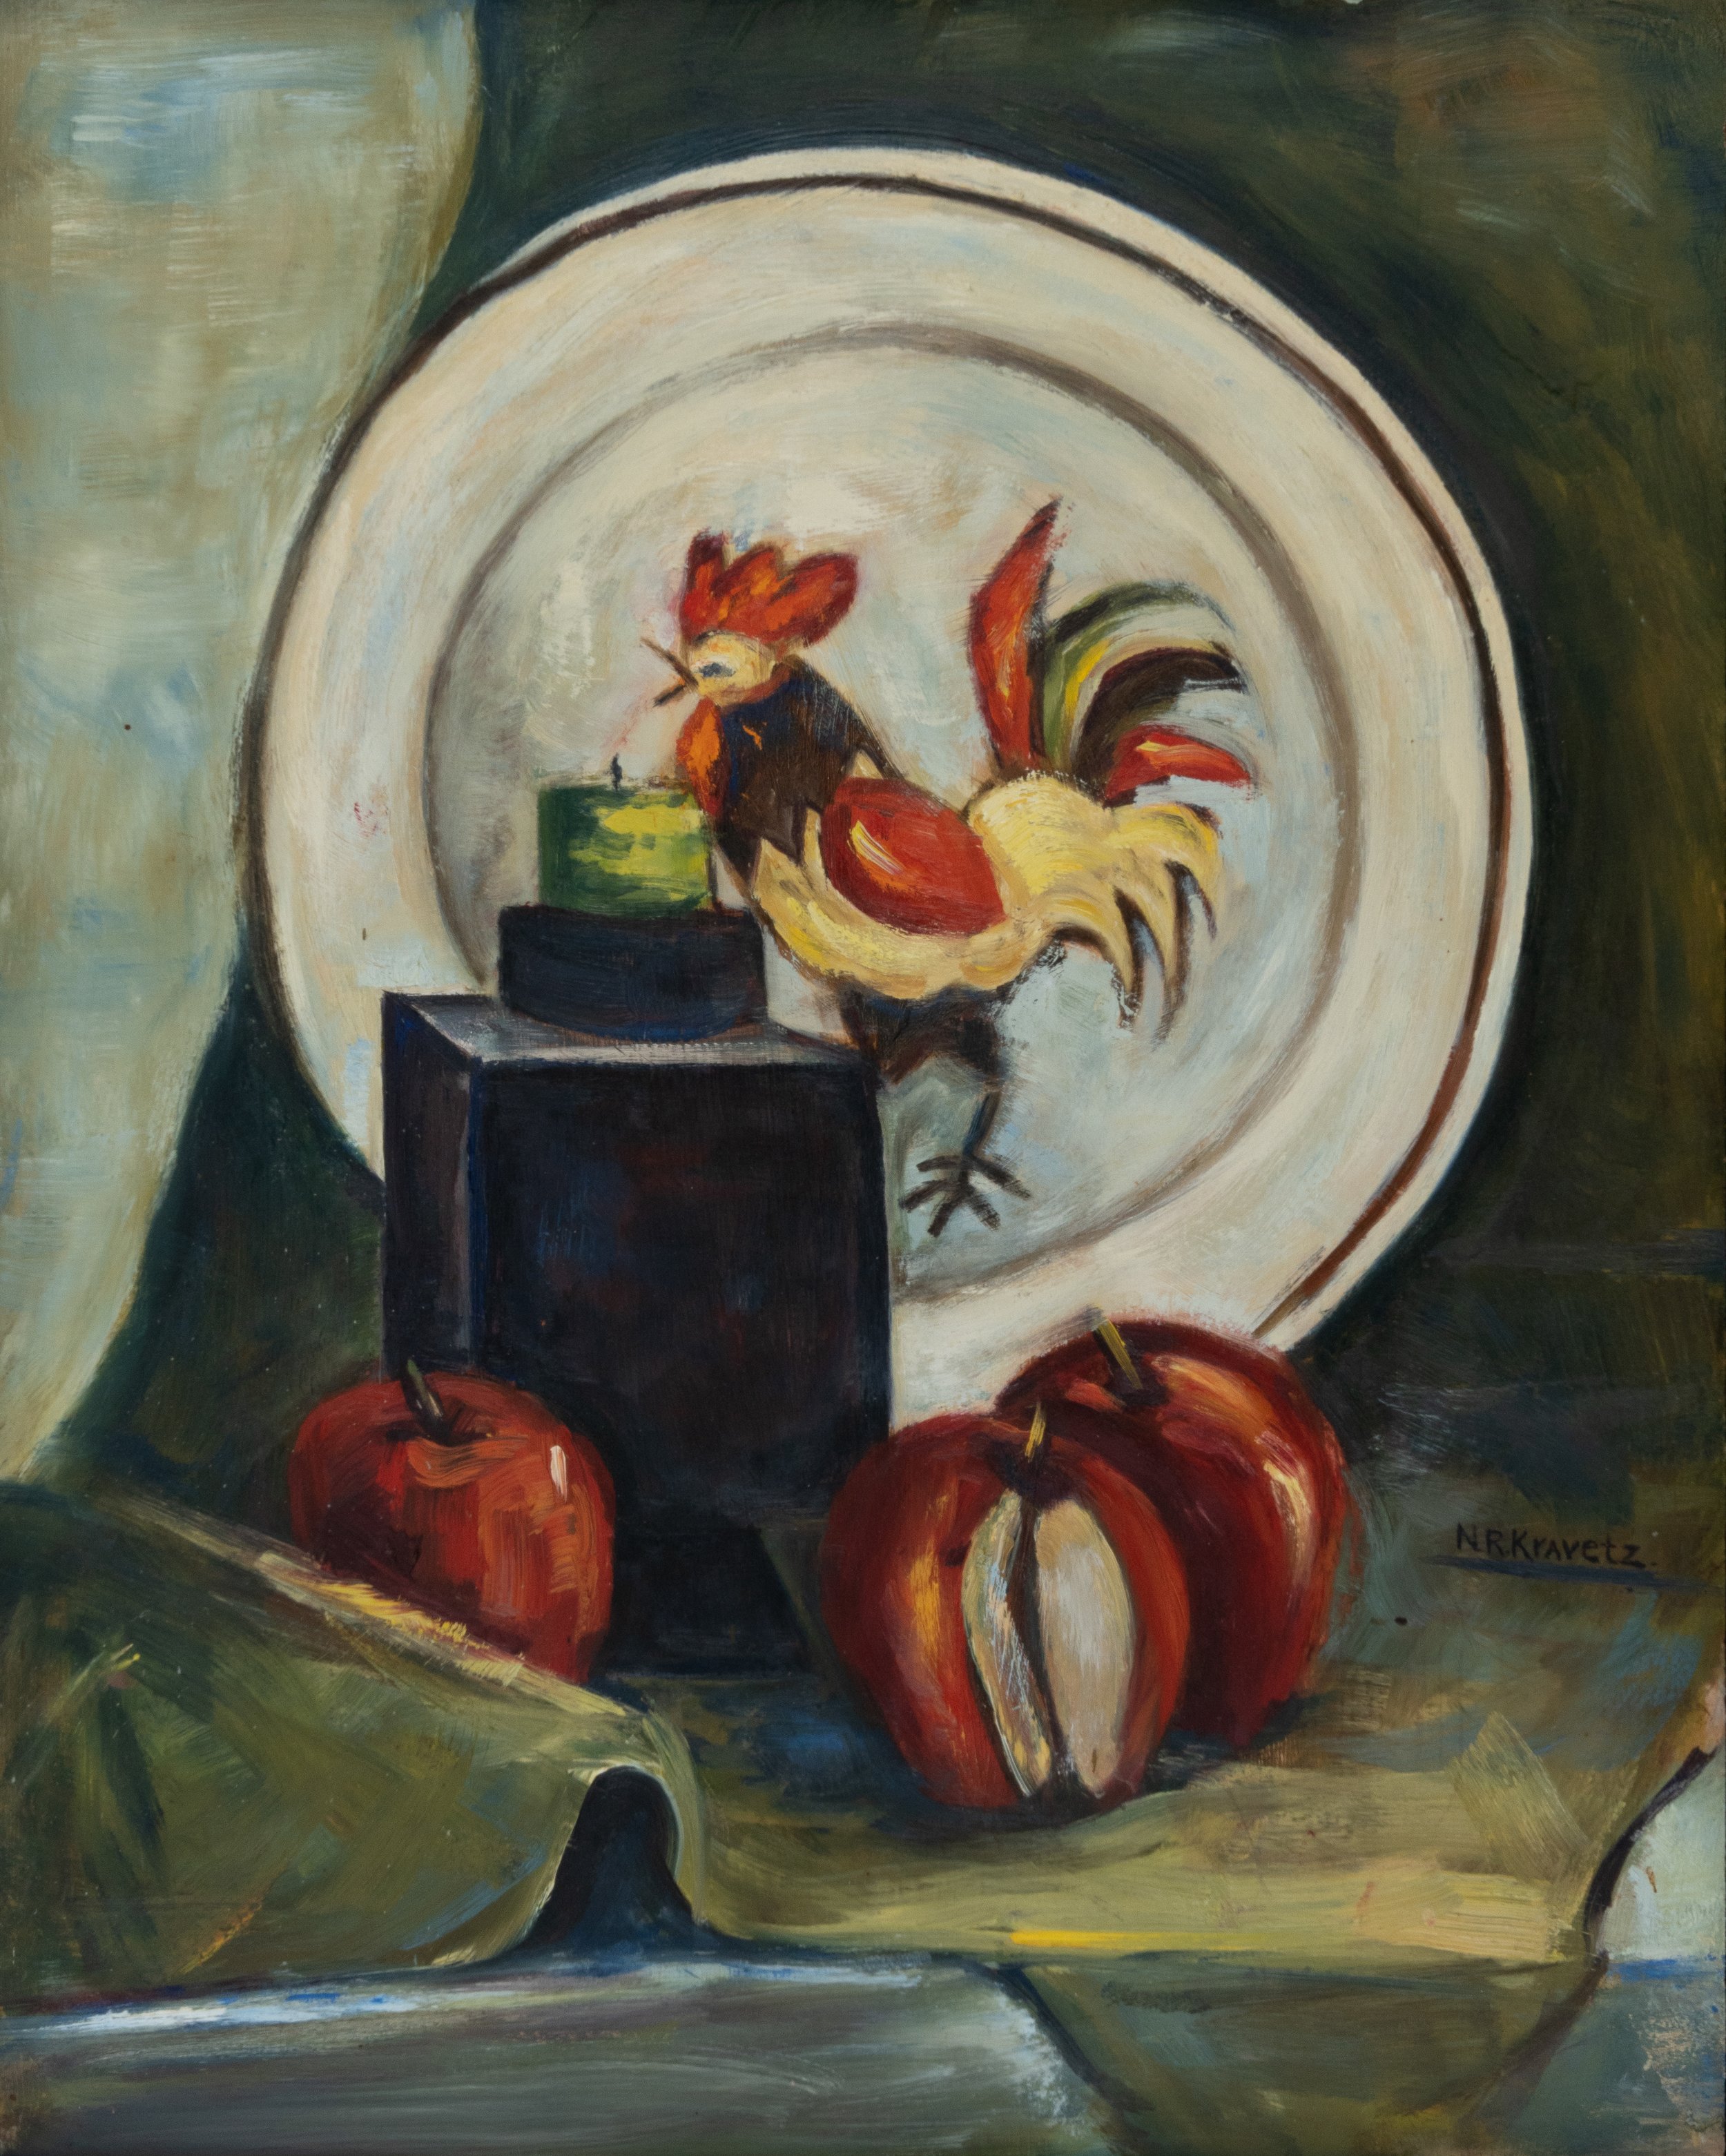 The Rooster, 1968, oil on masonite, 20x16 inches